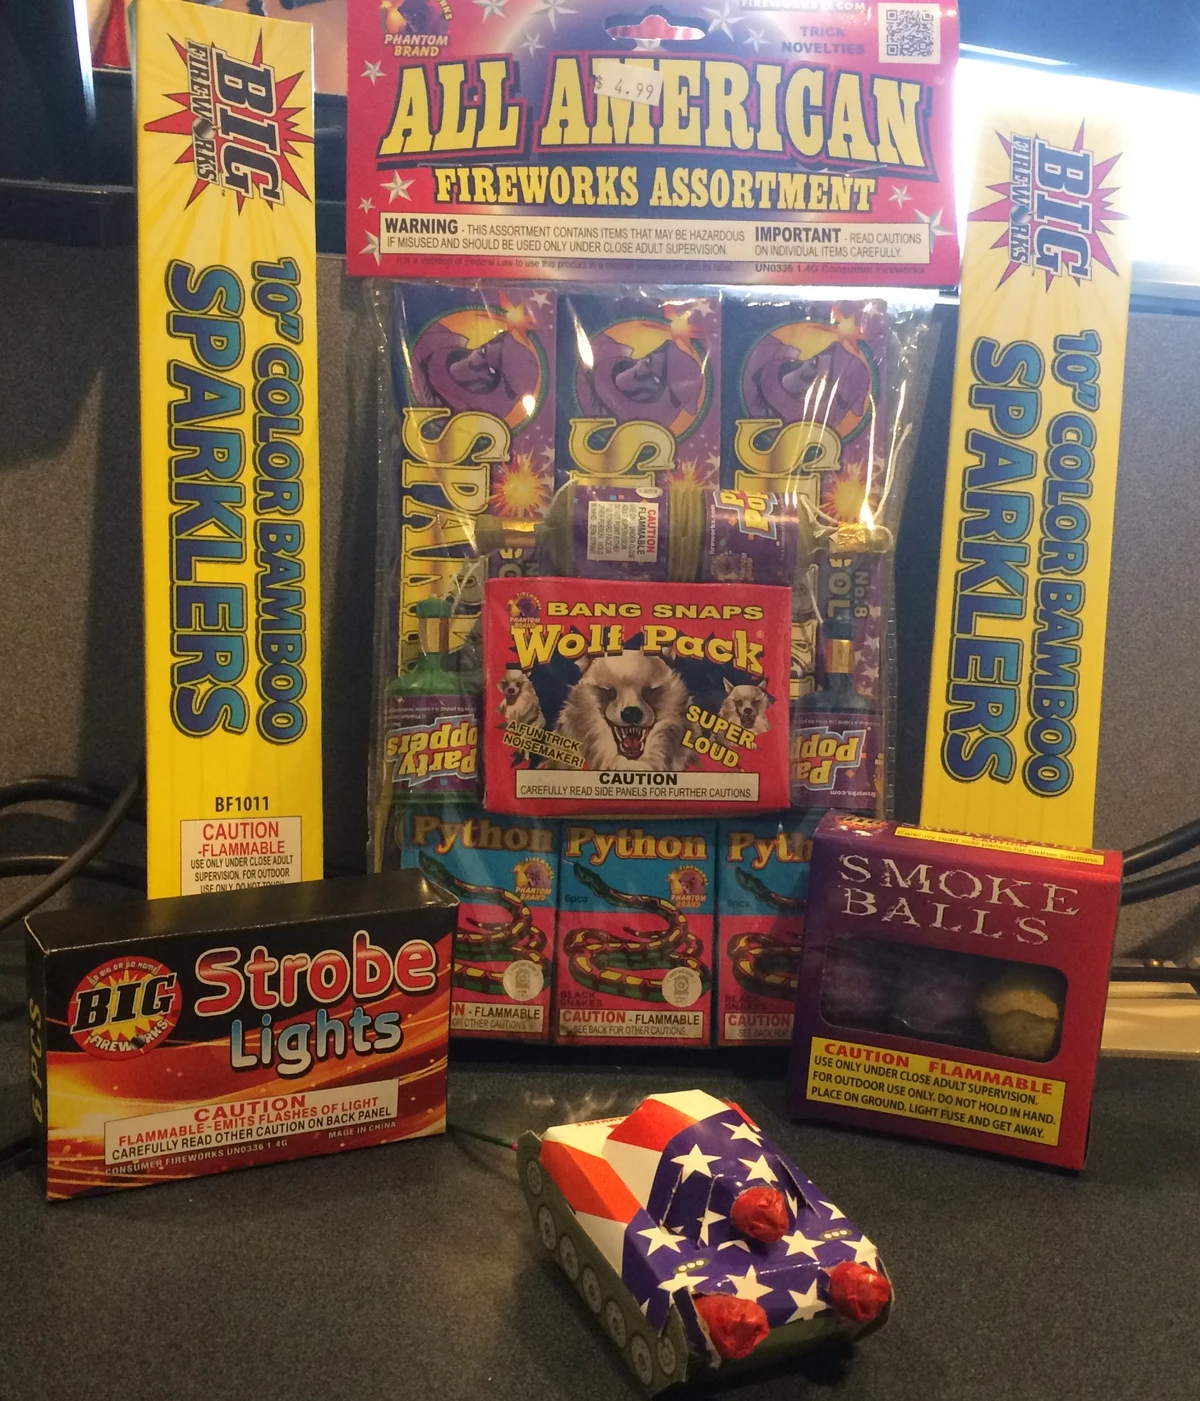 Here's Where To Buy Fireworks Legally For 4th of July in Buffalo